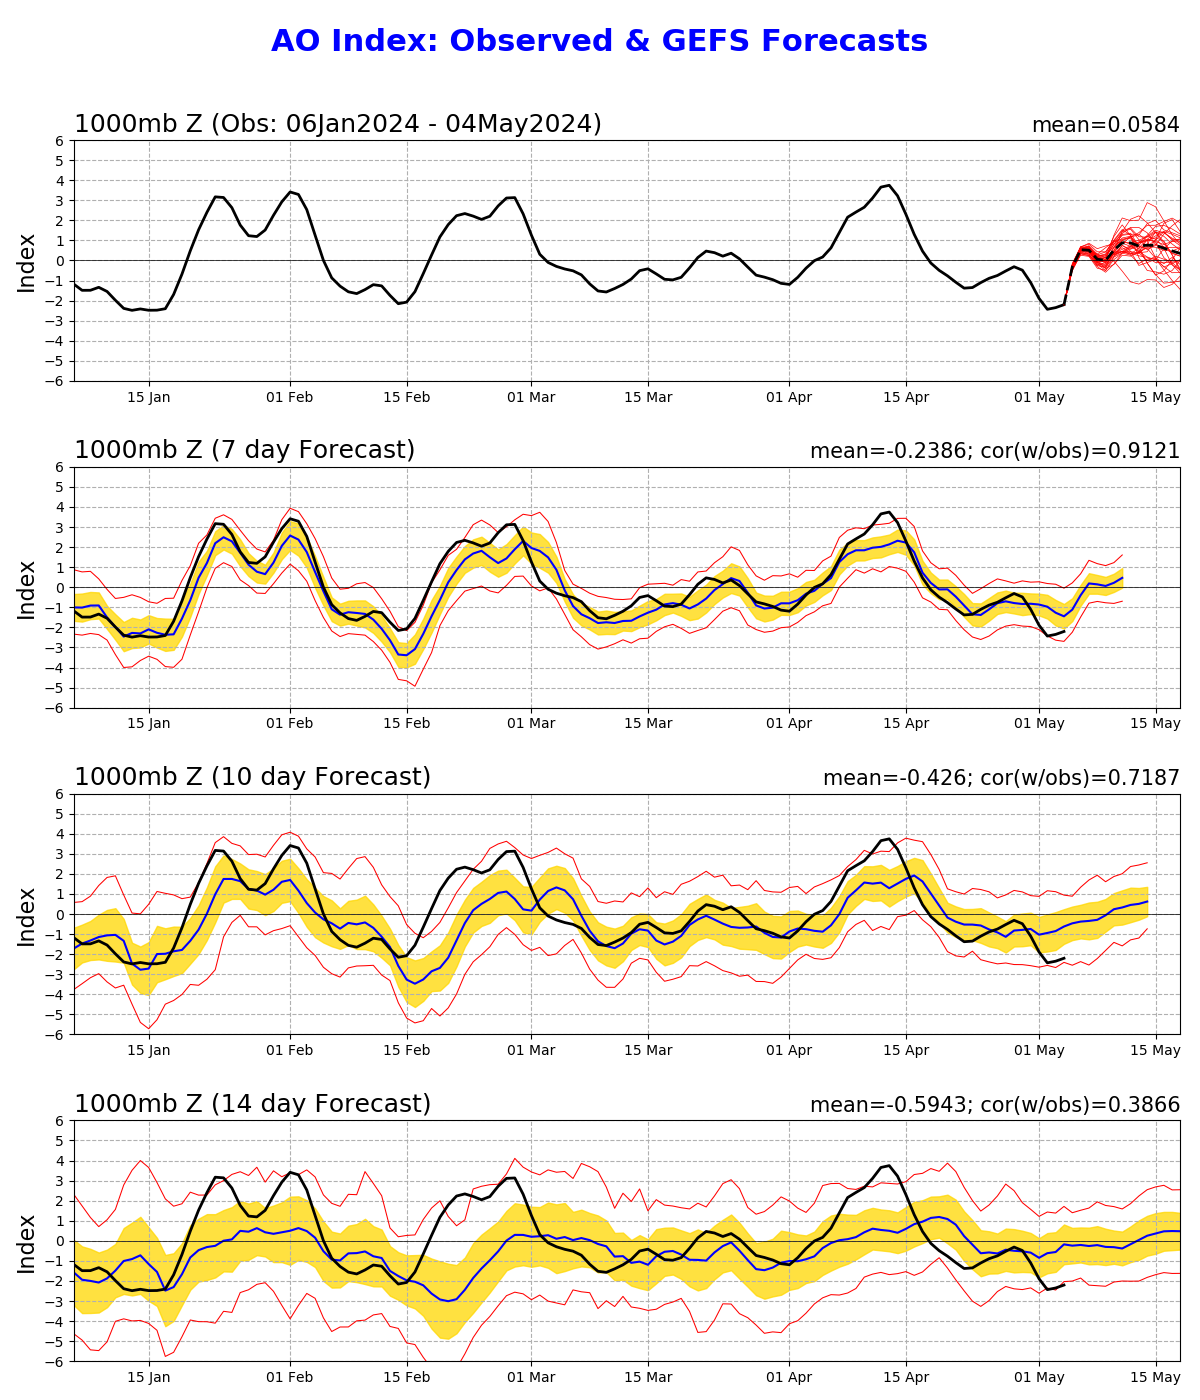 Daily AO index and its forecasts using GFS and Ensemble mean forecast data